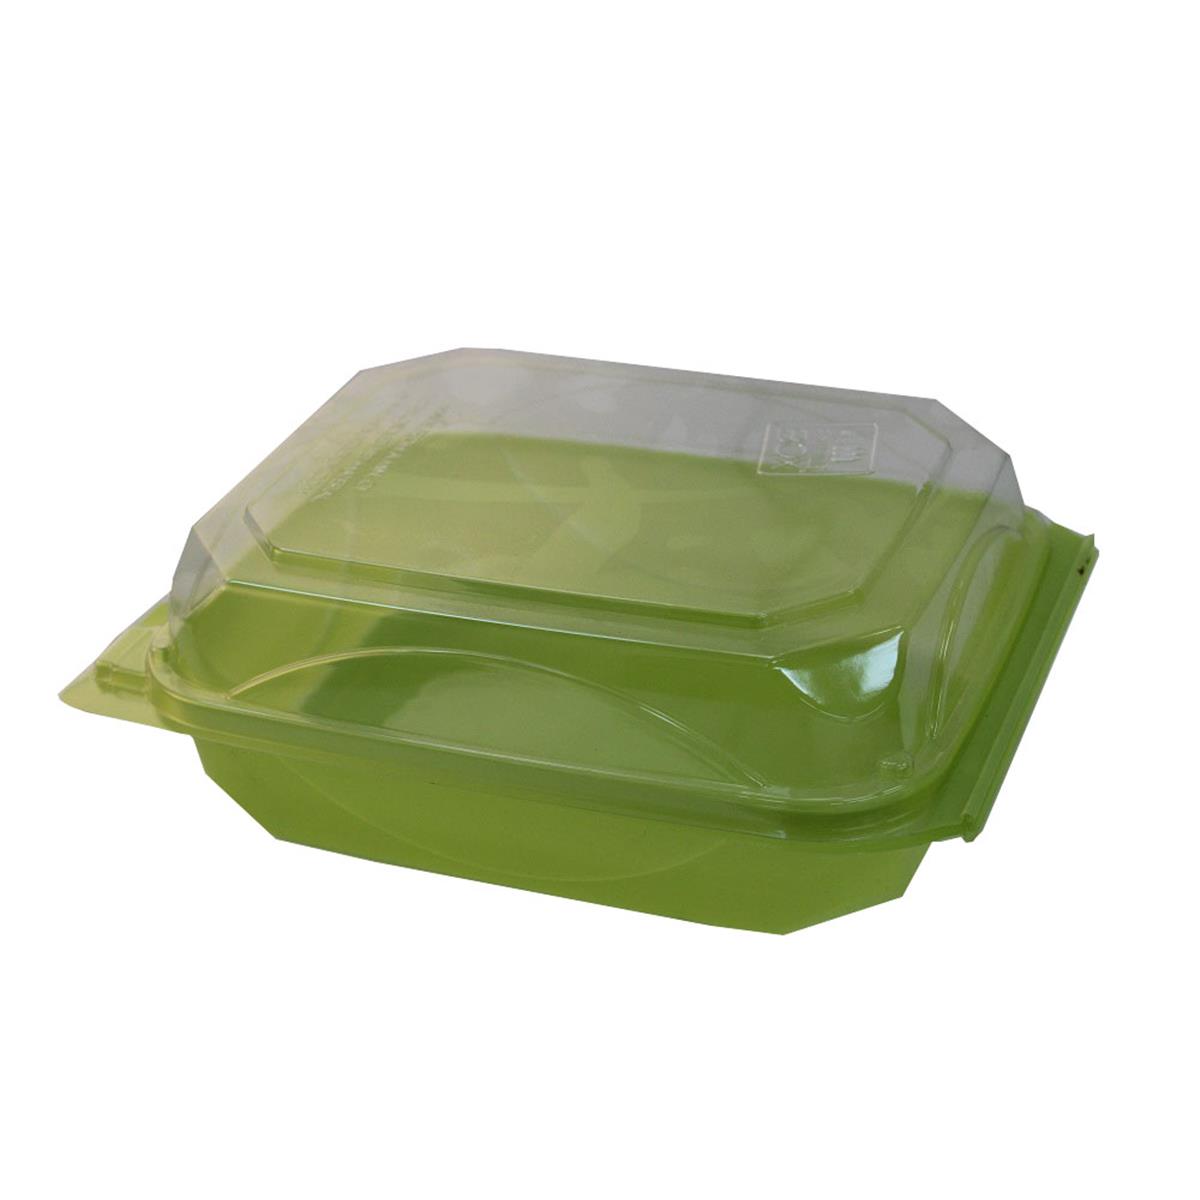 Cox-68-bb-lg Pec Hinged Container With Clear Lid, Lime Green